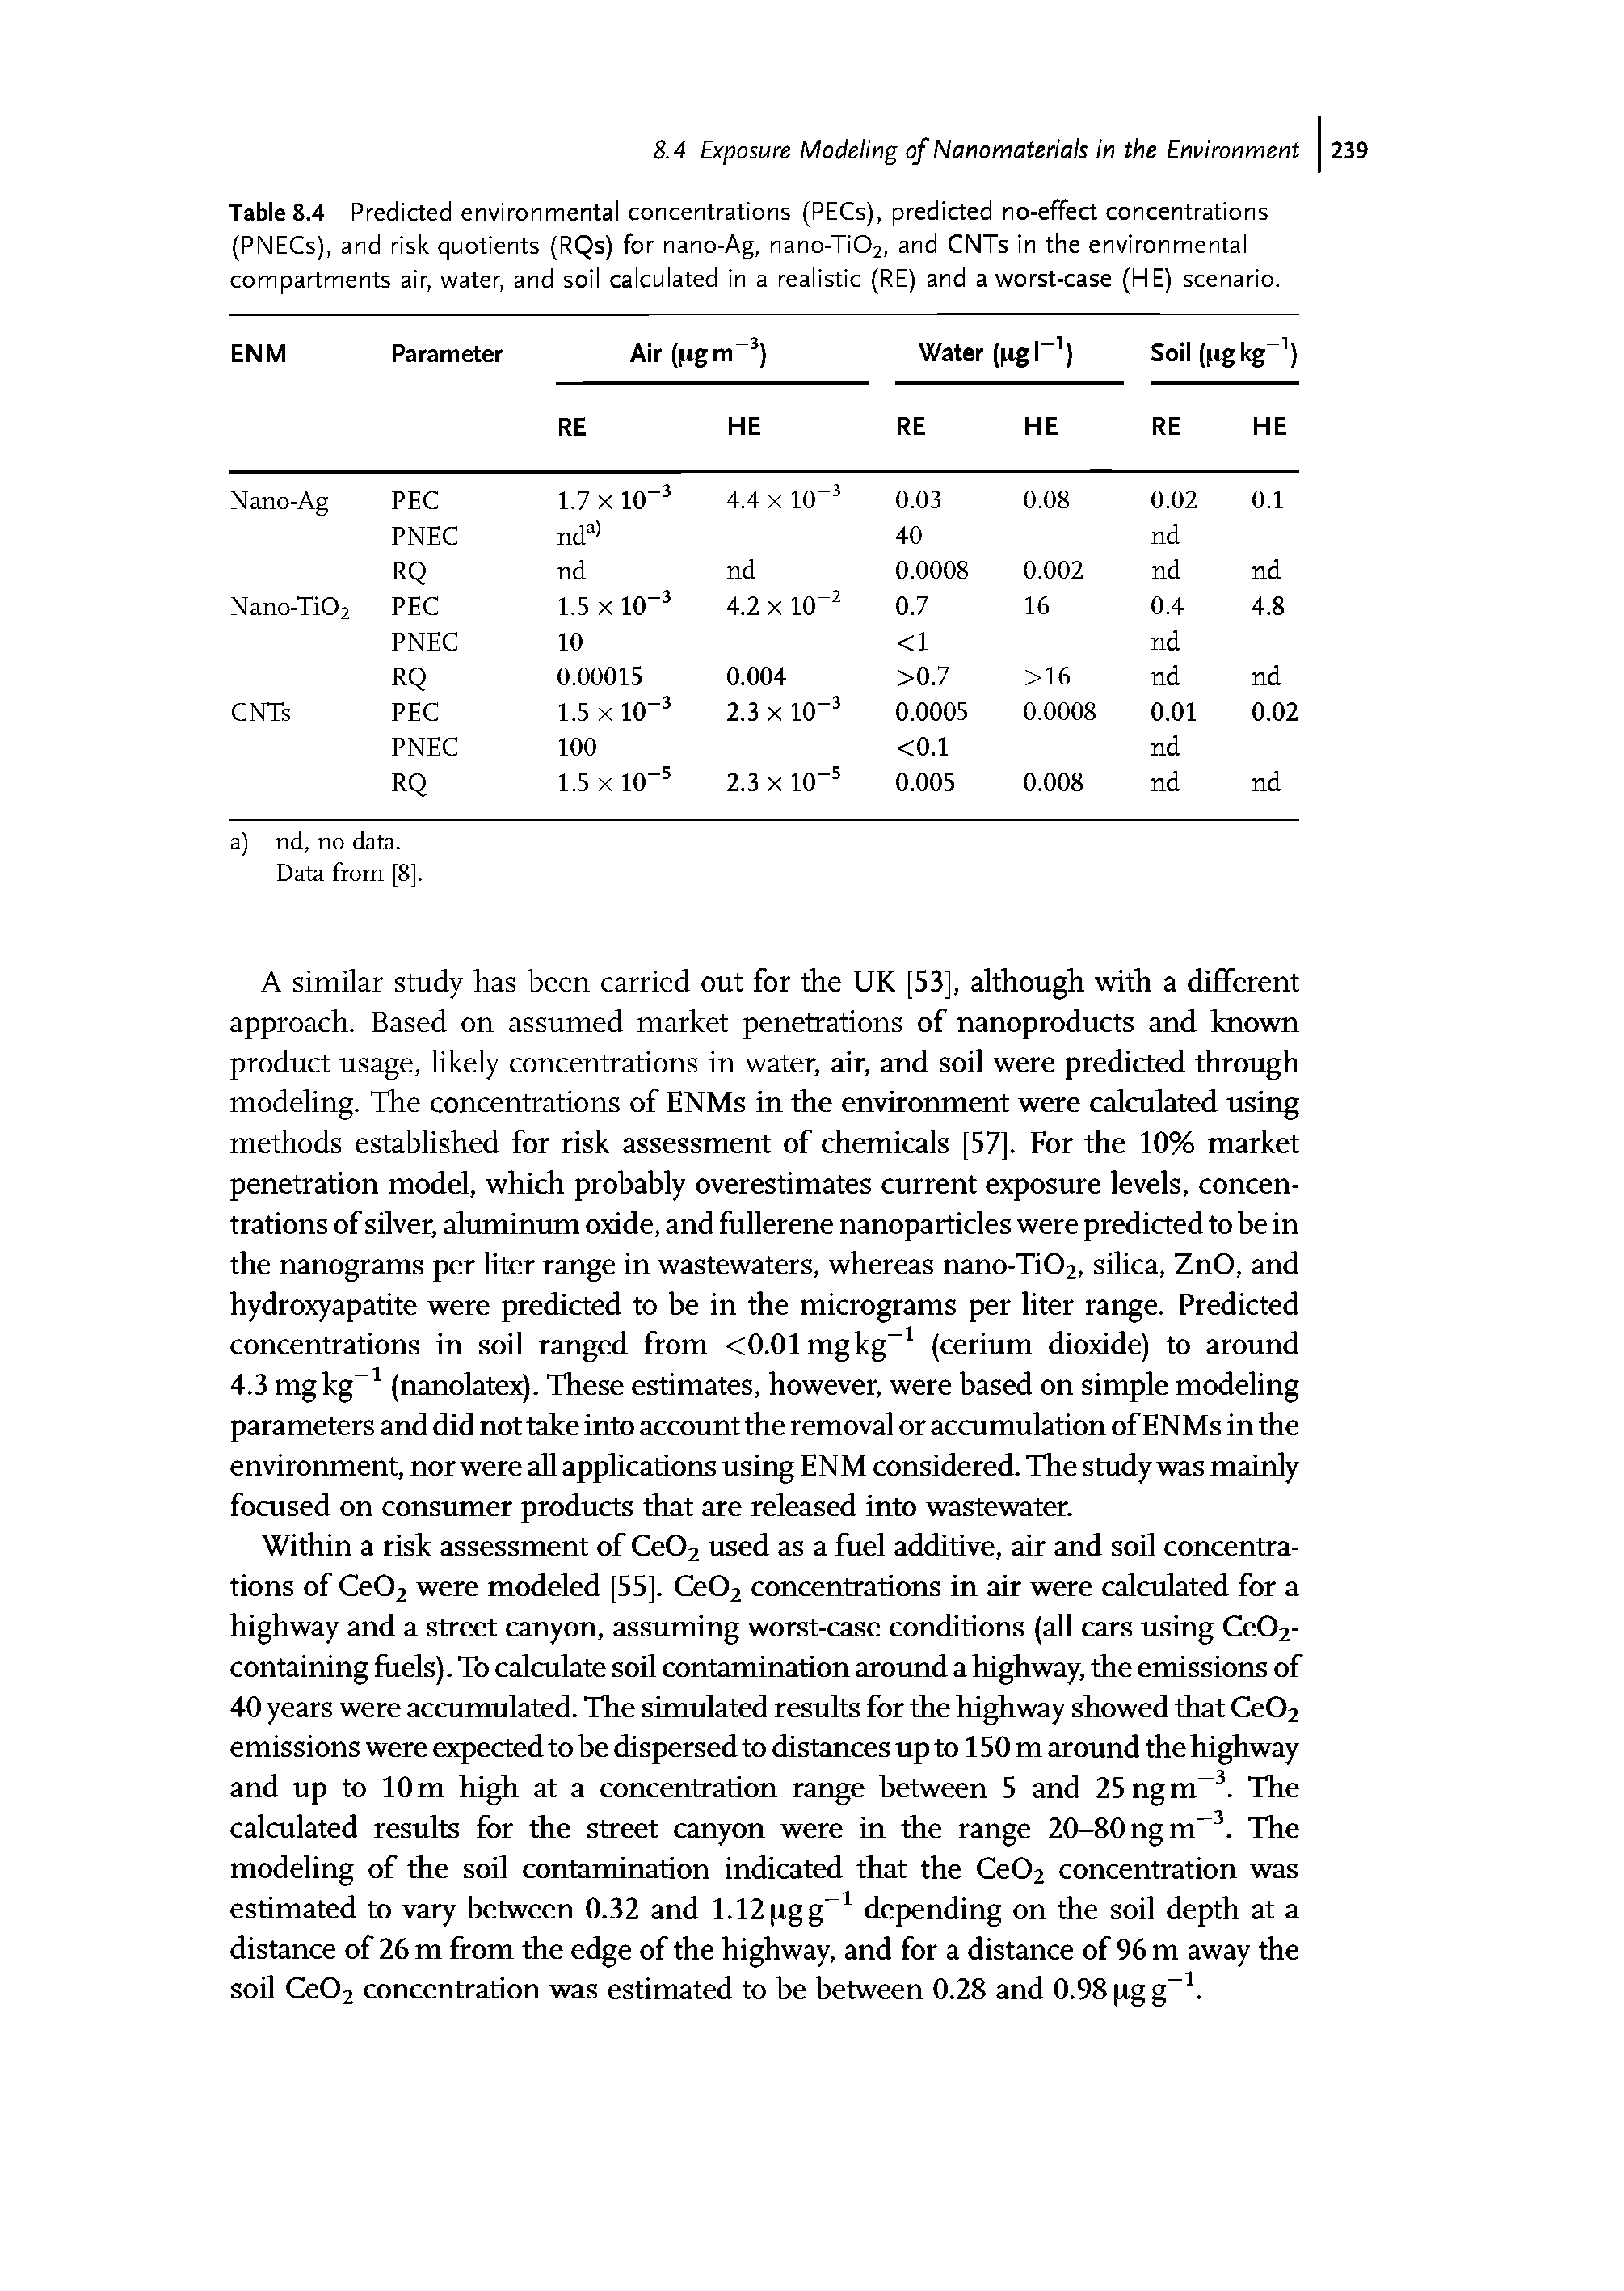 Table 8.4 Predicted environmental concentrations (PECs), predicted no-effect concentrations (PNECs), and risk quotients (RQs) for nano-Ag, nano-Ti02, and CNTs in the environmental compartments air, water, and soil calculated in a realistic (RE) and a worst-case (HE) scenario.